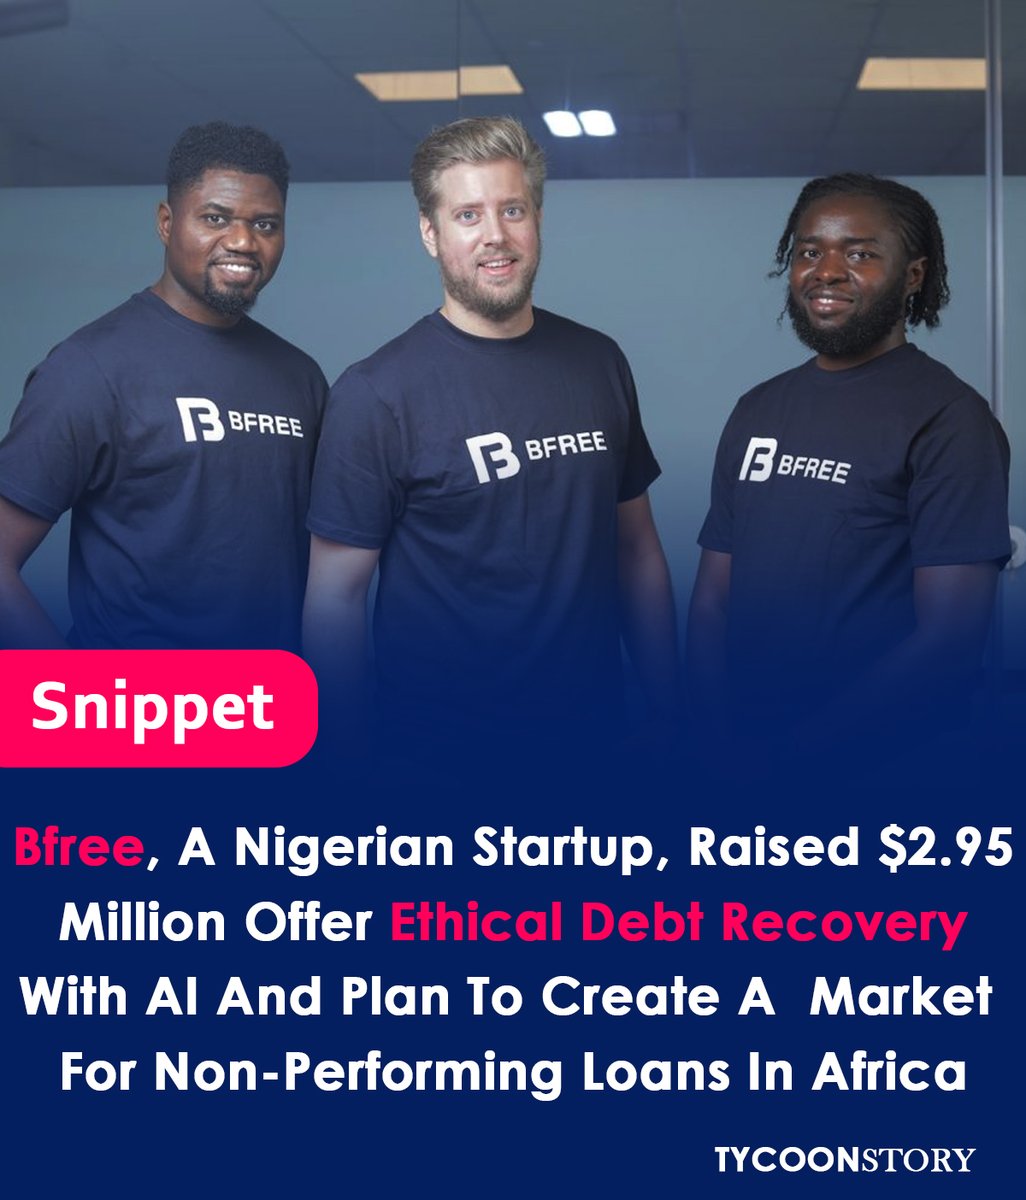 Nigerian startup Bfree uses AI and ethical practices to collect debt
#ethicaldebtcollection #AI #fintech #Africa #debtrecovery #nonperformingloans #Bfree #financialservices #financialinclusion #alternativefinance #scalablebusiness @bfree_global